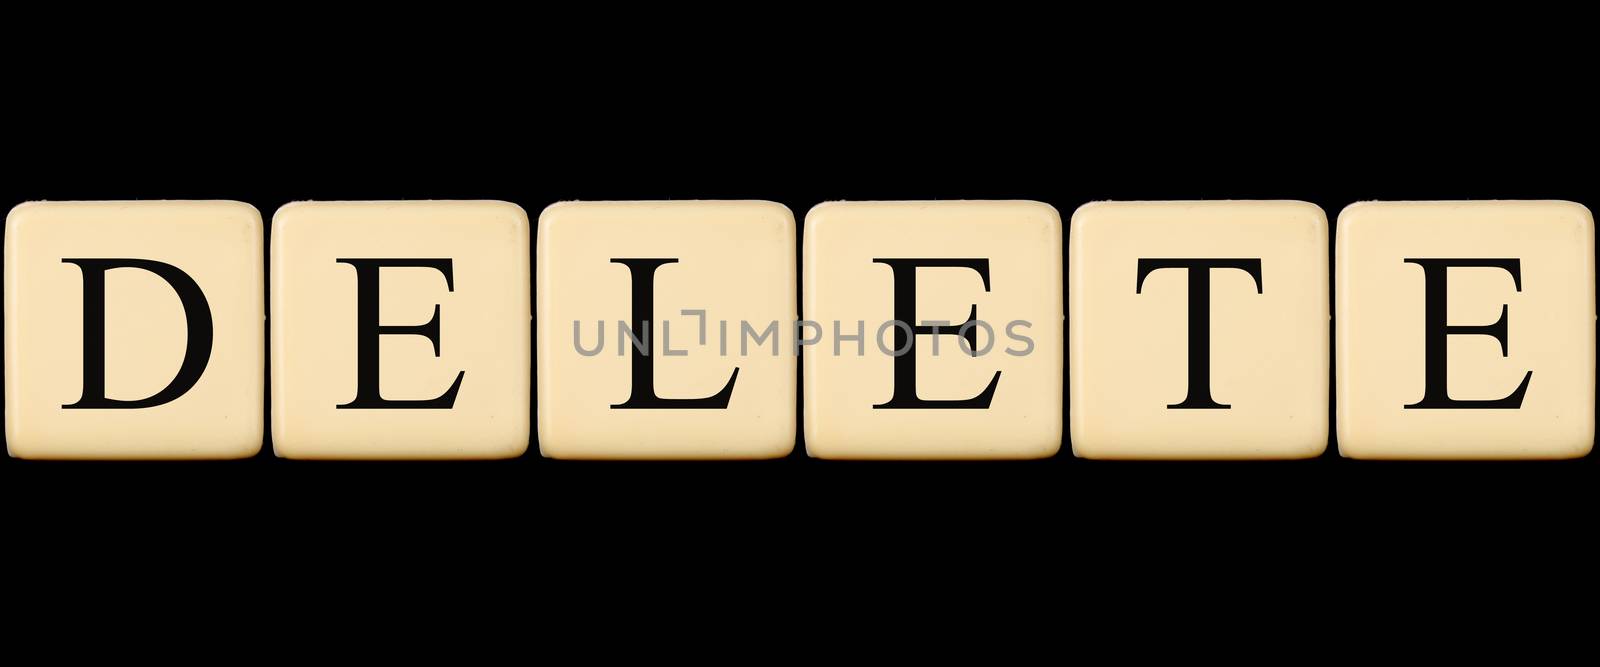 A delete word made from scrabble tiles, on black studio background.